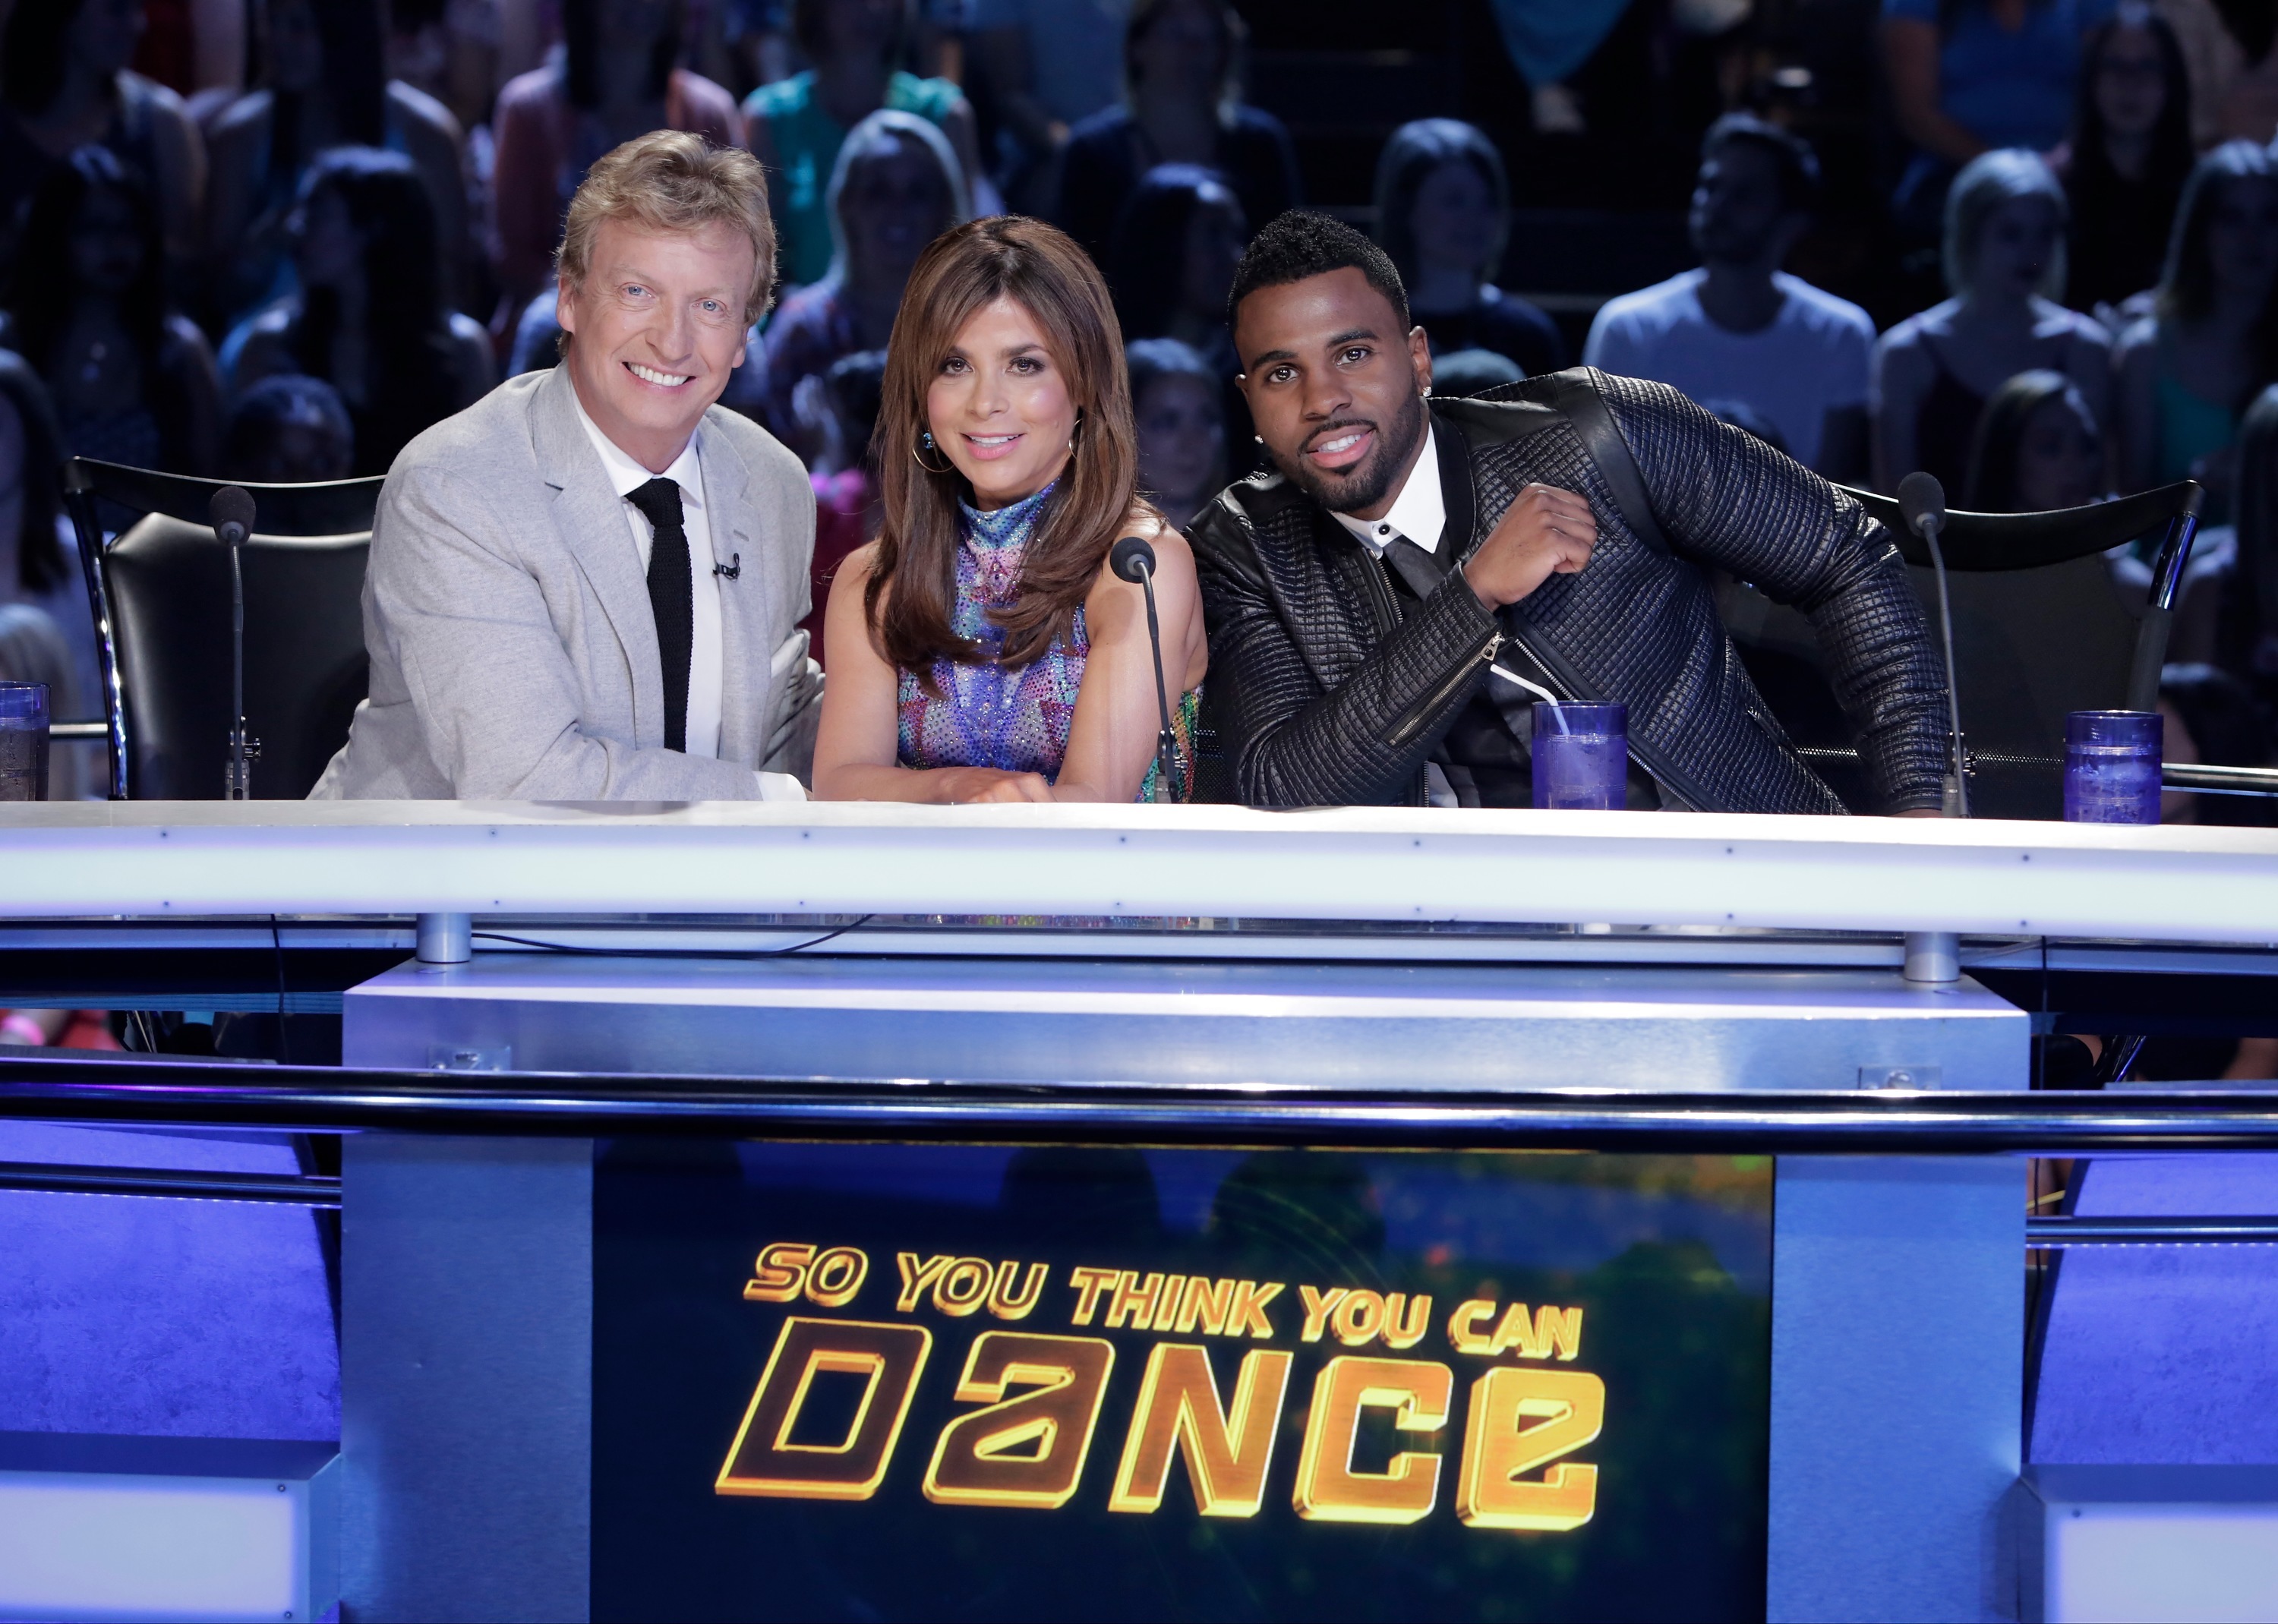 So You Think You Can Dance Season 13 Is a Renewal in the Works? TV